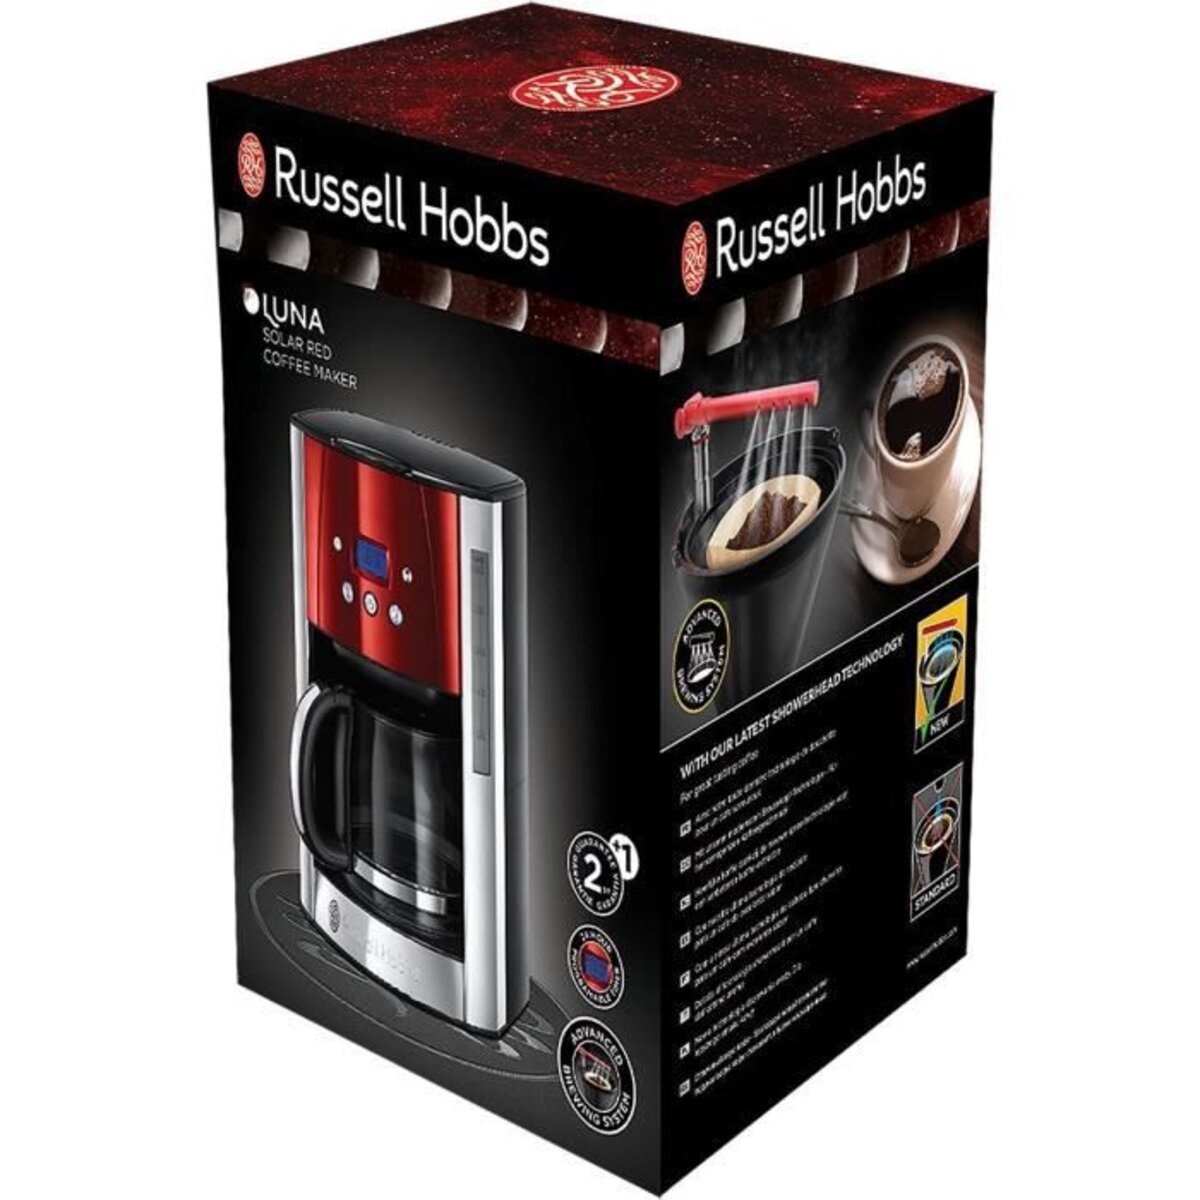 RUSSELL HOBBS Cafetière isotherme et programmable Chester 20670-56